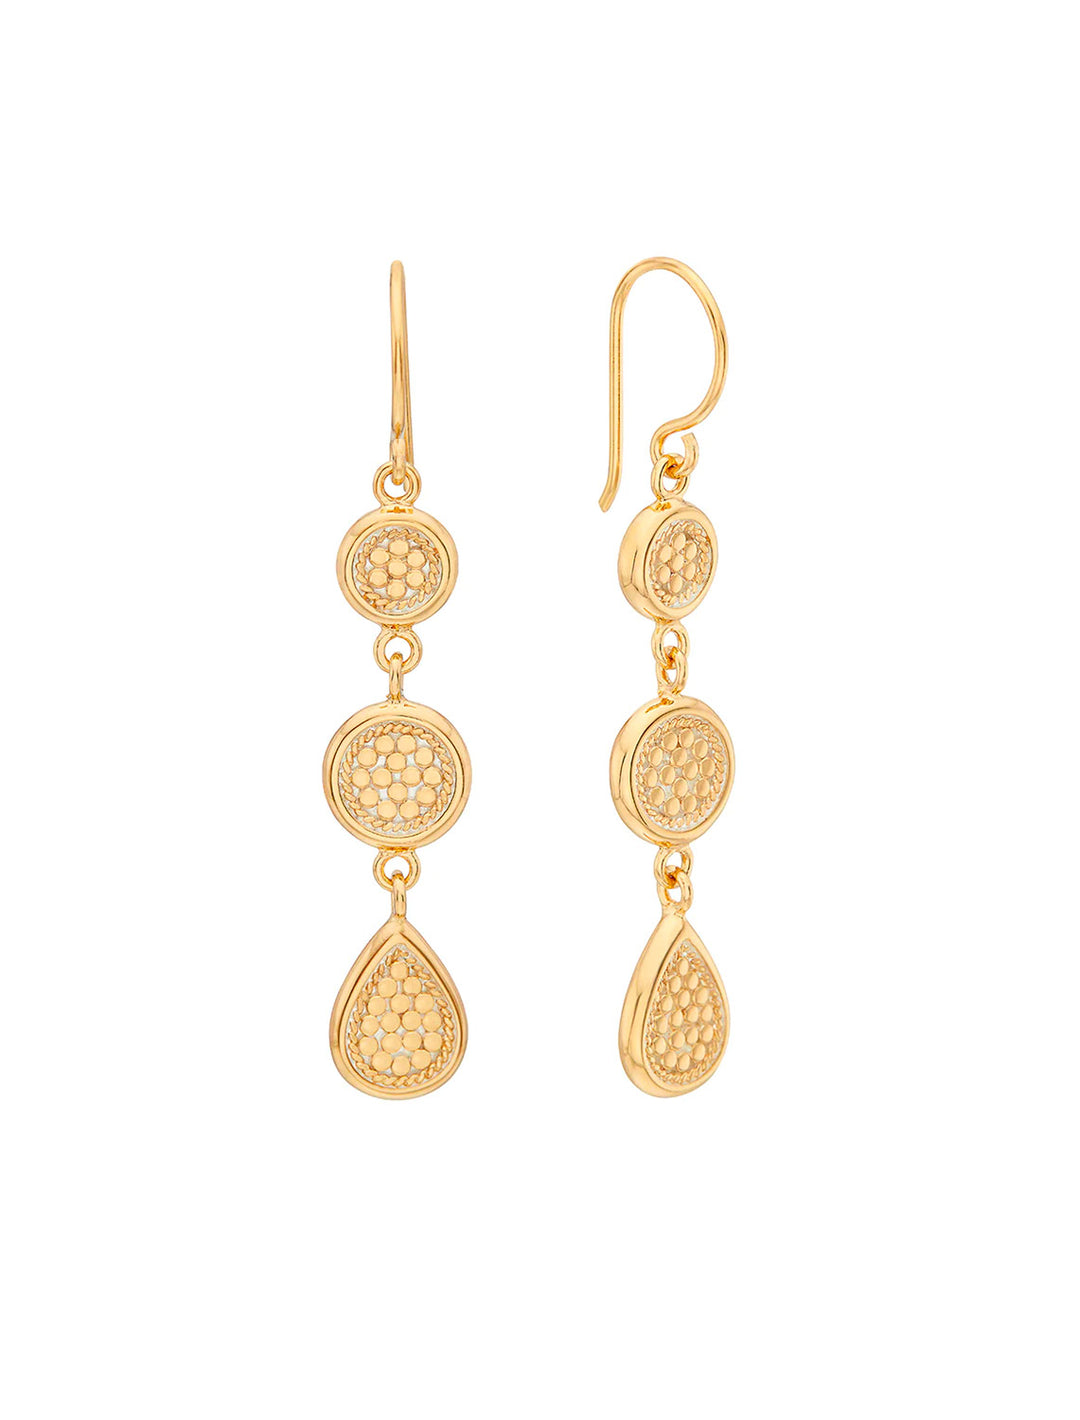 Front view of Anna Beck's classic triple drop earrings in gold.